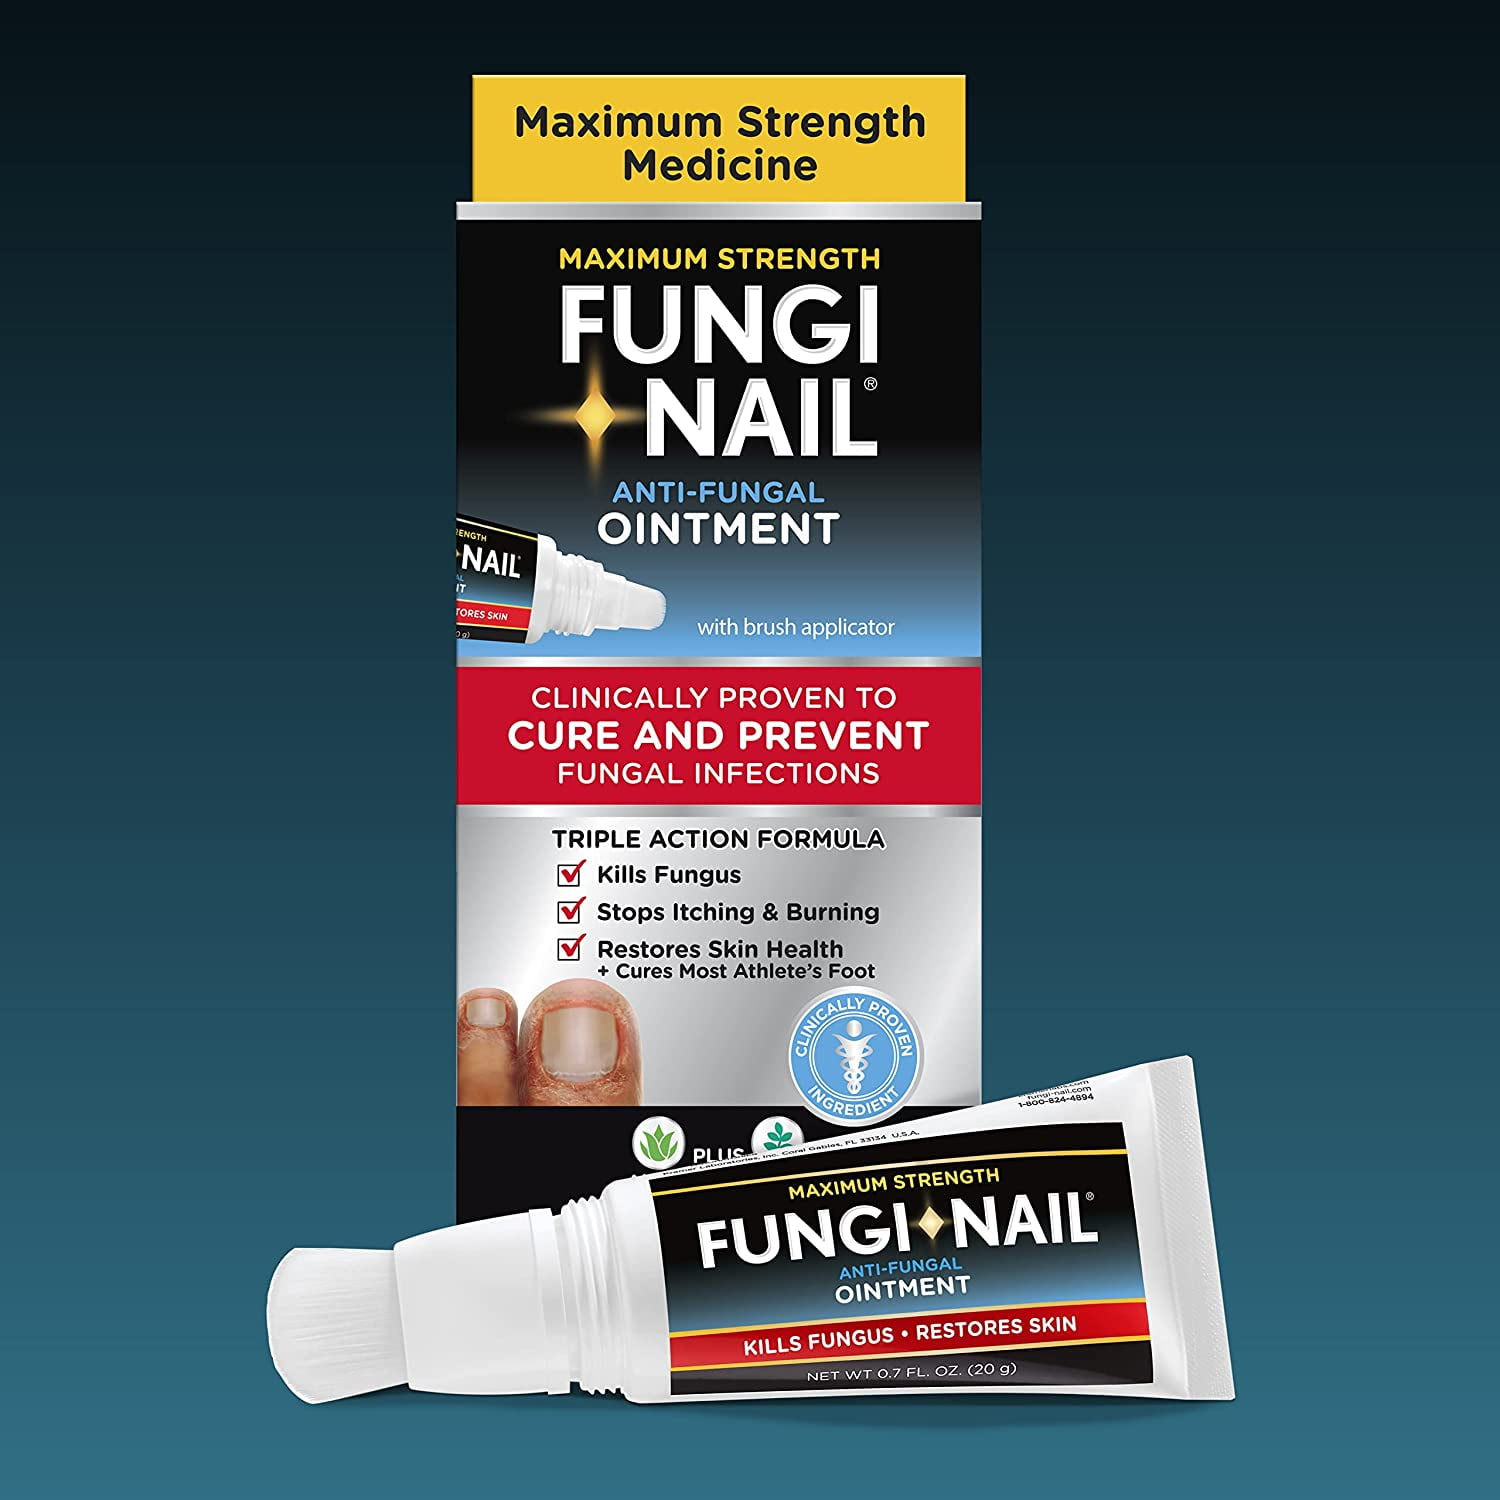 Fungi-Nail MAXIMUM STRENGTH ANTI-FUNGAL OINTMENT Solution Stops Itching  Restores | eBay